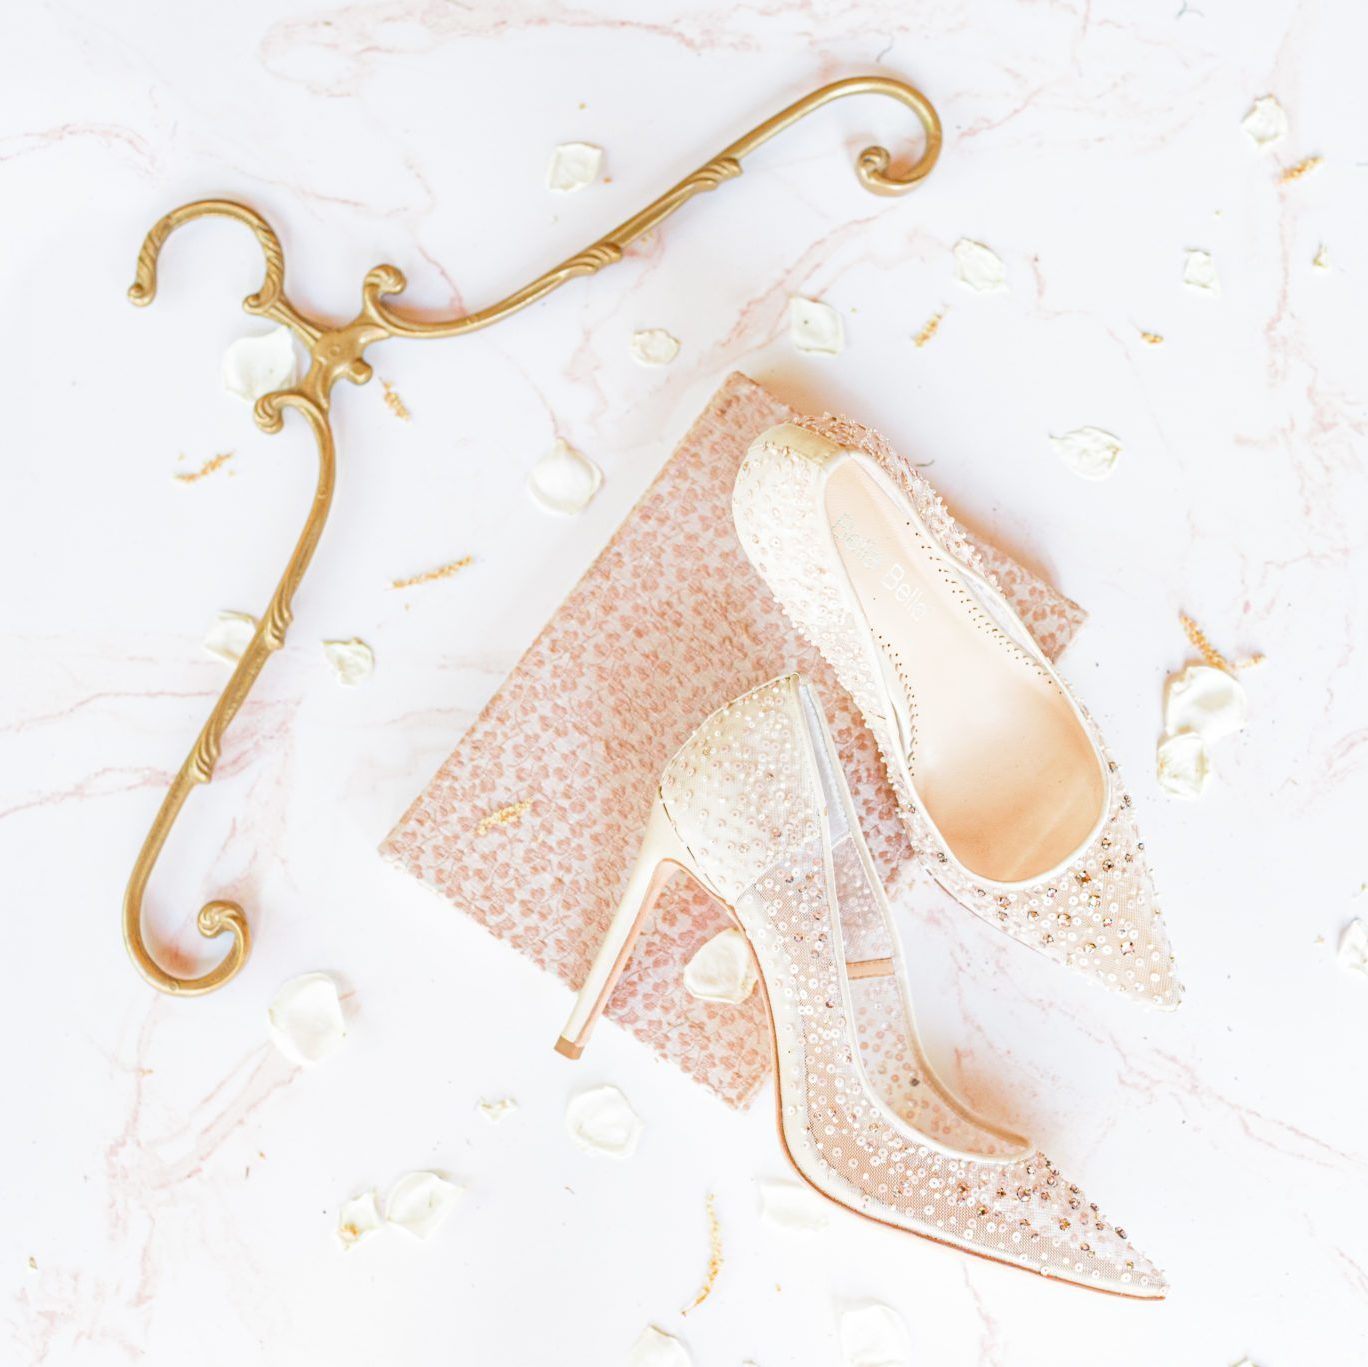 A pretty vintage hanger can be a great addition to your wedding invite photos.